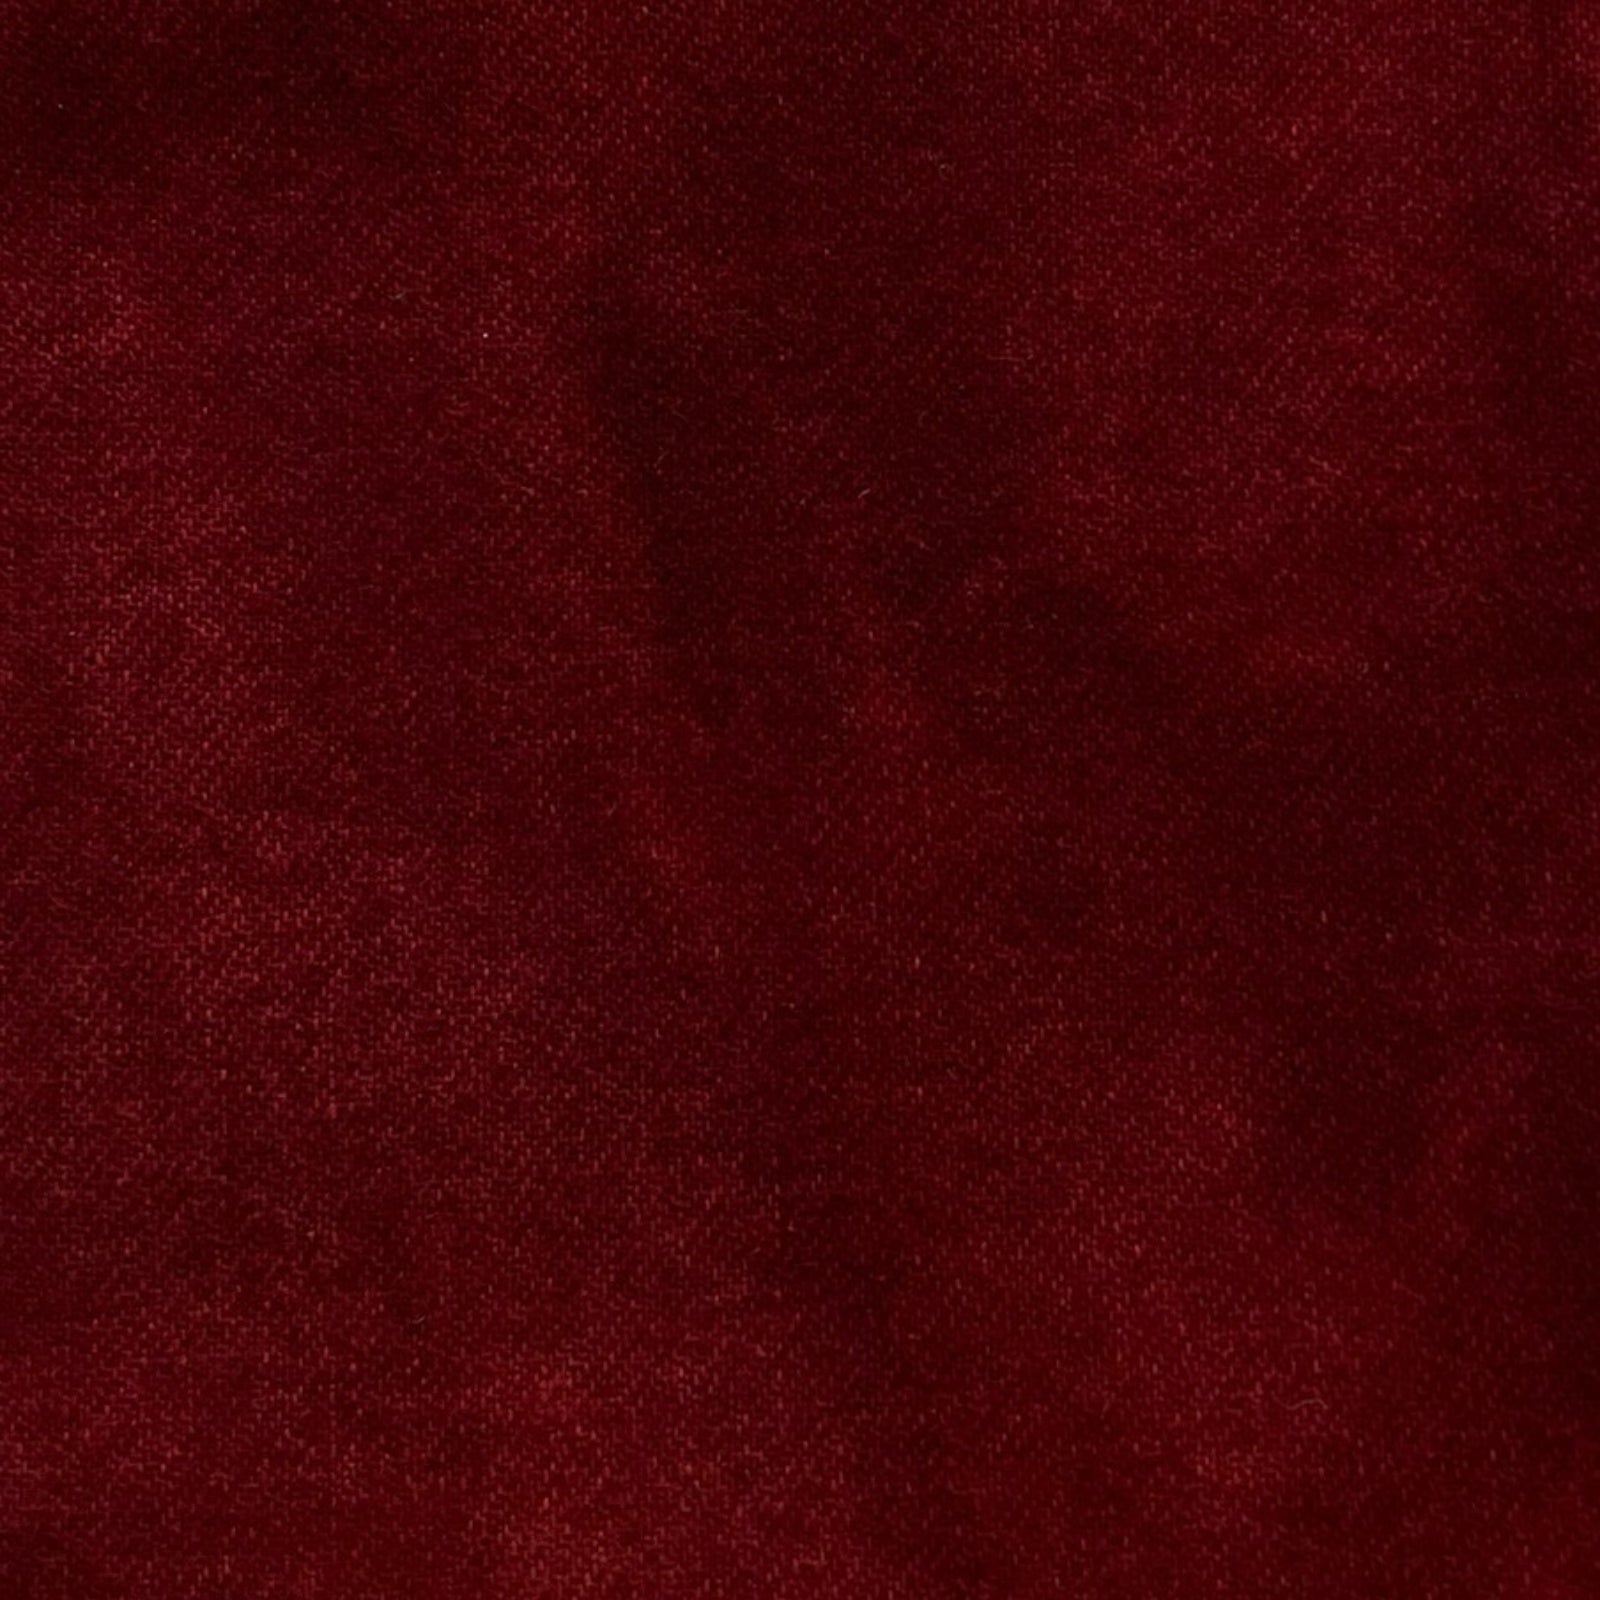 Holly Hill Red Dark - Colorama Hand Dyed Wool - Offered by HoneyBee Hive Rug Hooking